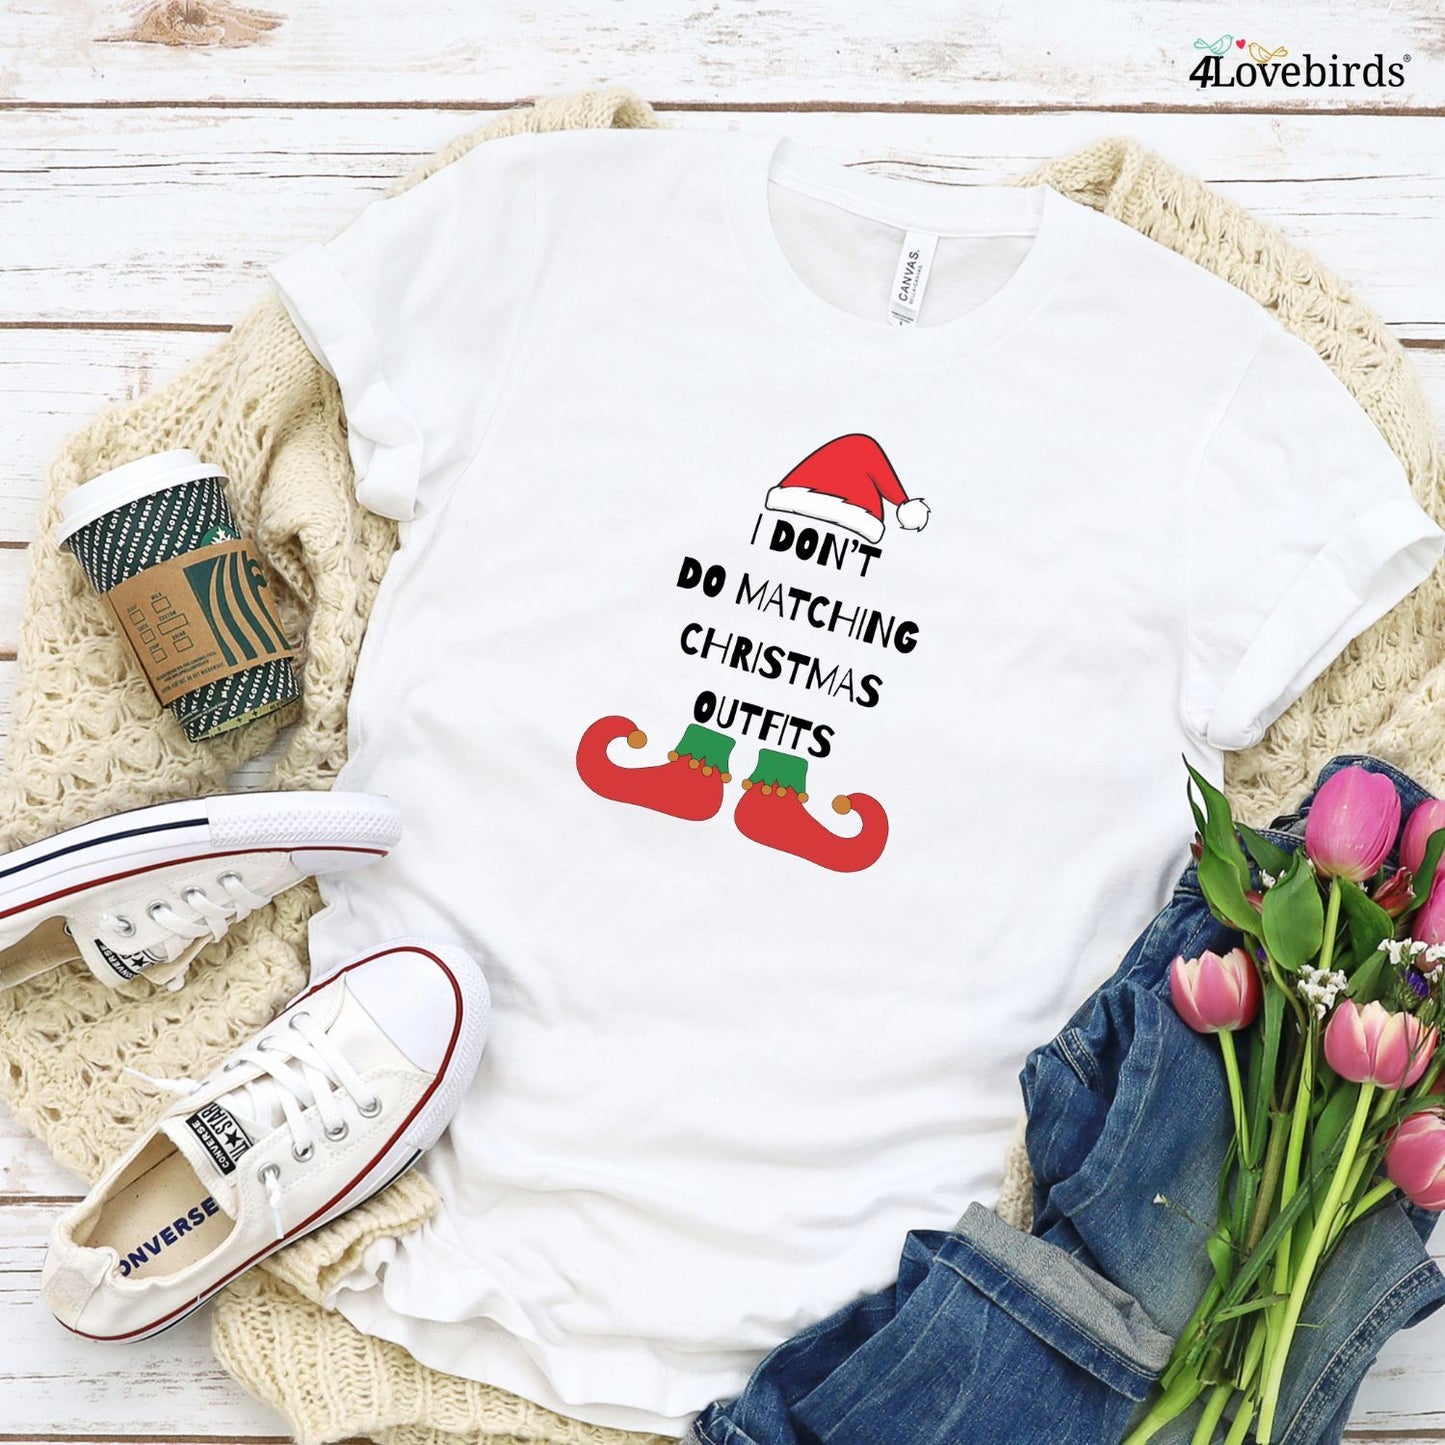 Festive His & Hers Matching Outfits with Santa Slogan: Ideal Set for Christmas Couples